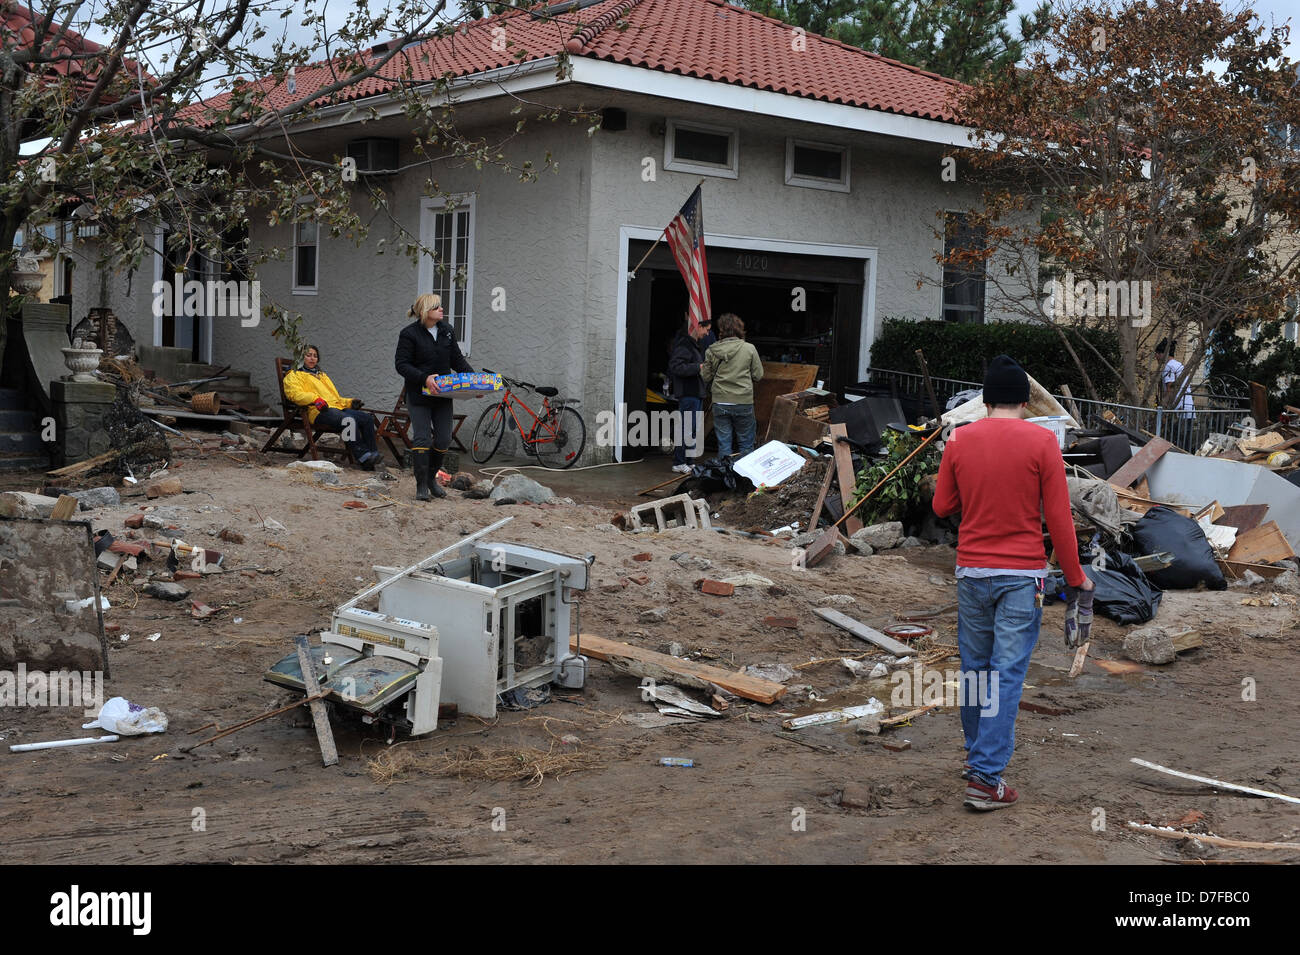 BROOKLYN, NY - NOVEMBER 01: Serious damage in the buildings at the Seagate neighborhood due to impact from Hurricane Sandy Stock Photo